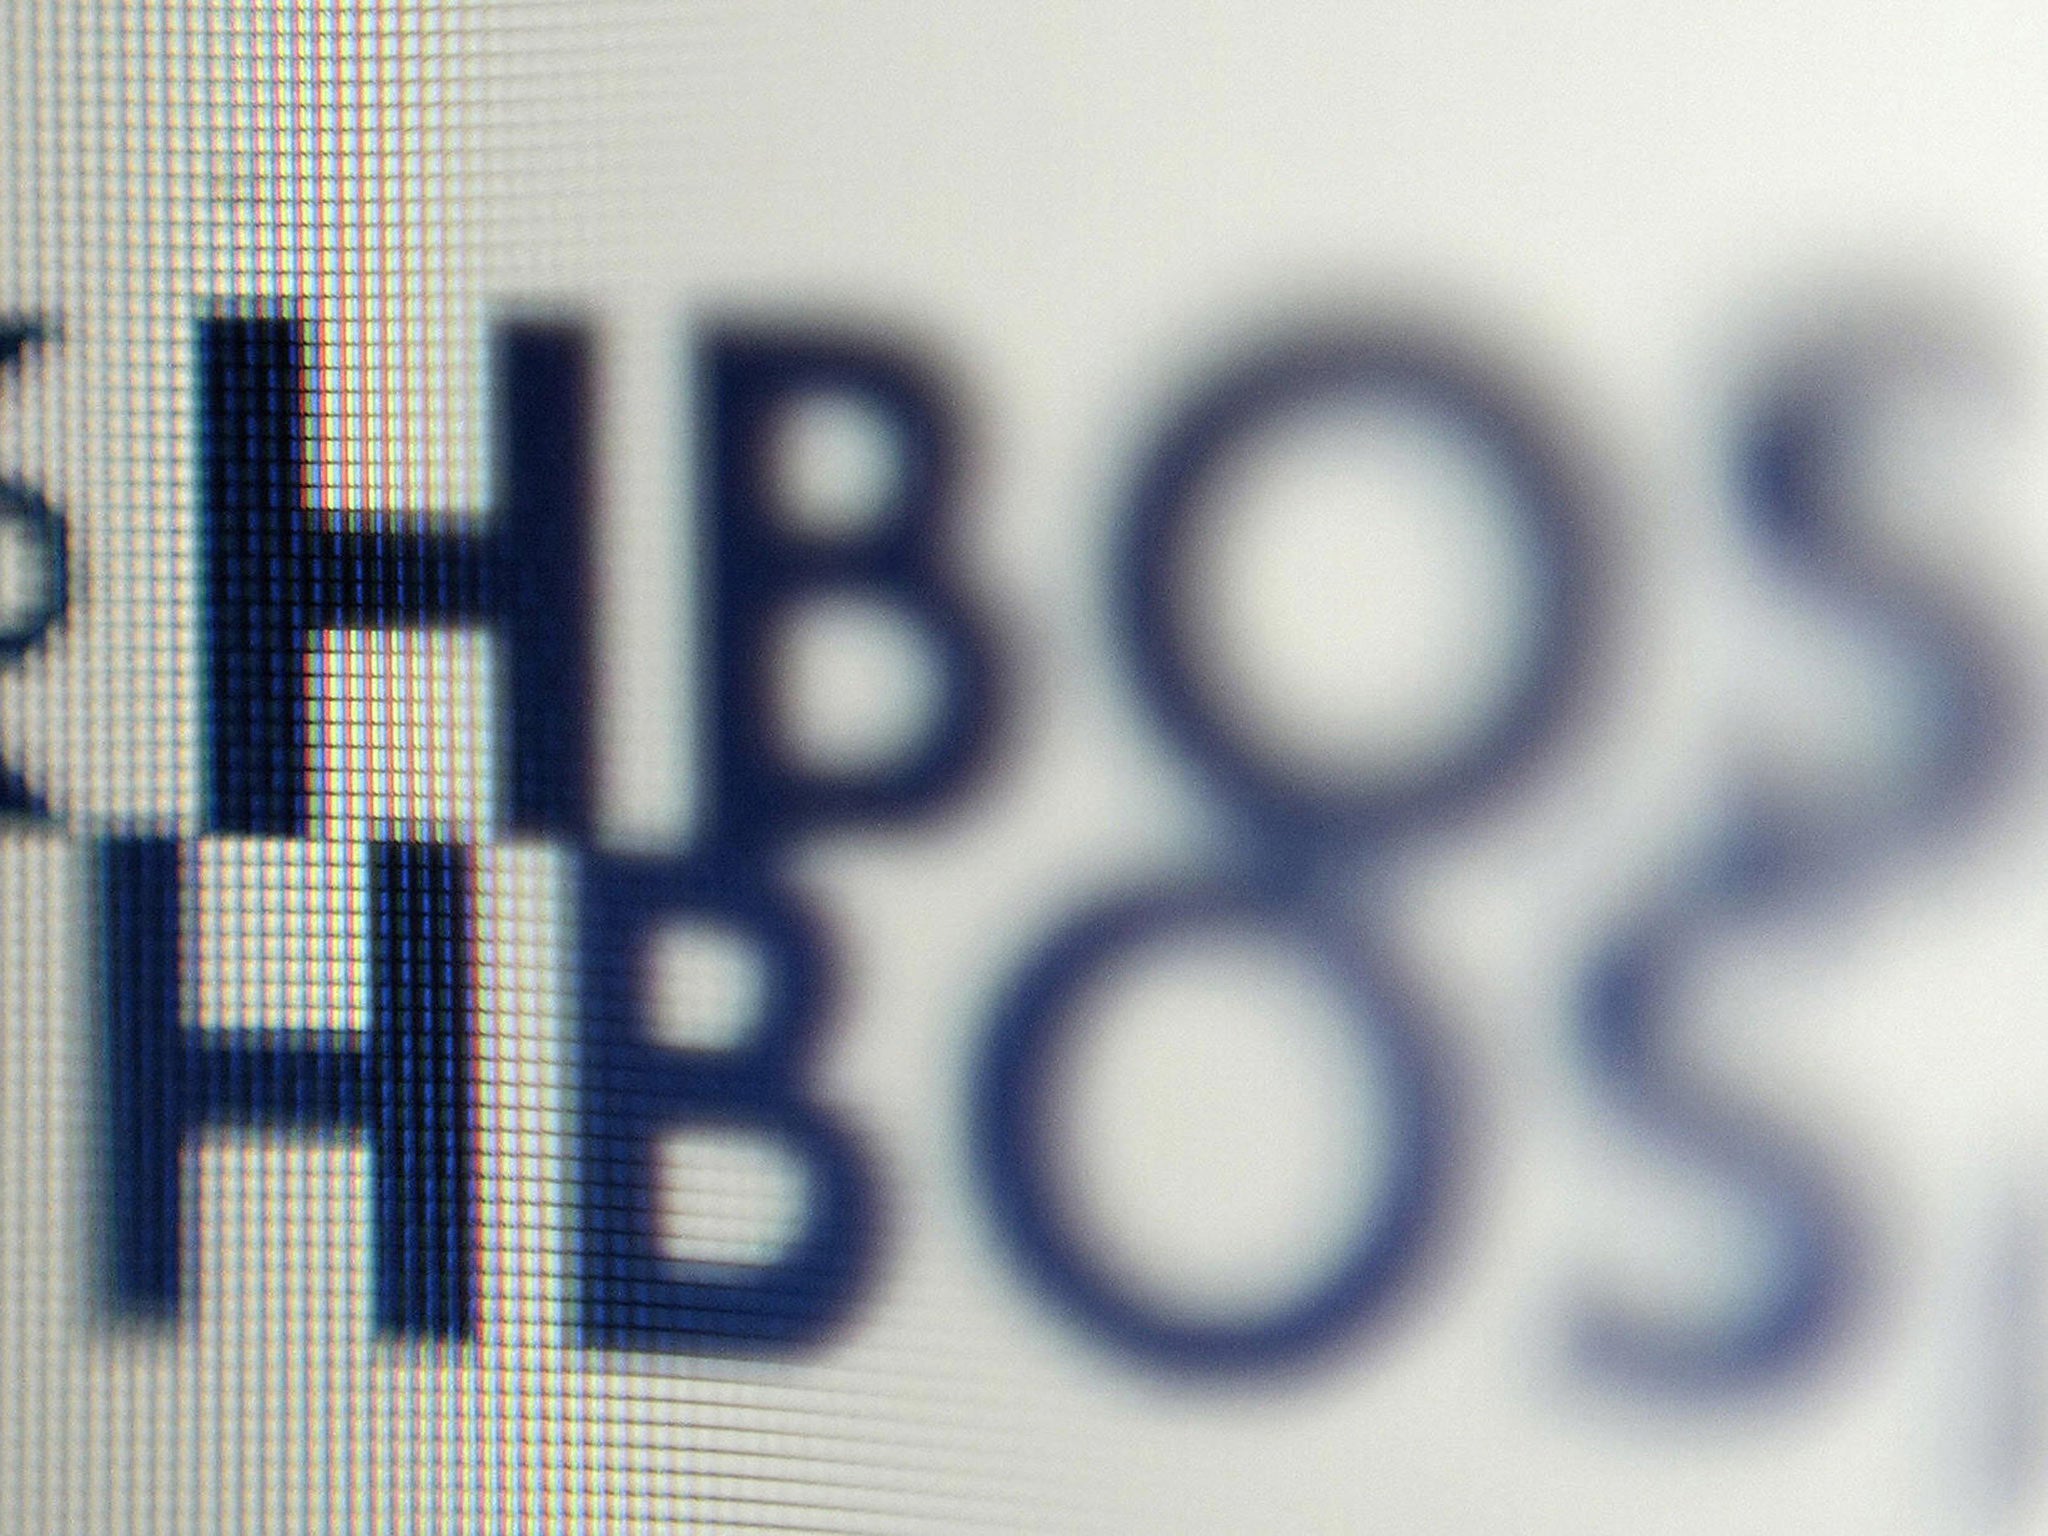 FRC still says it can't bring a case against KPMG over its audit of HBOS